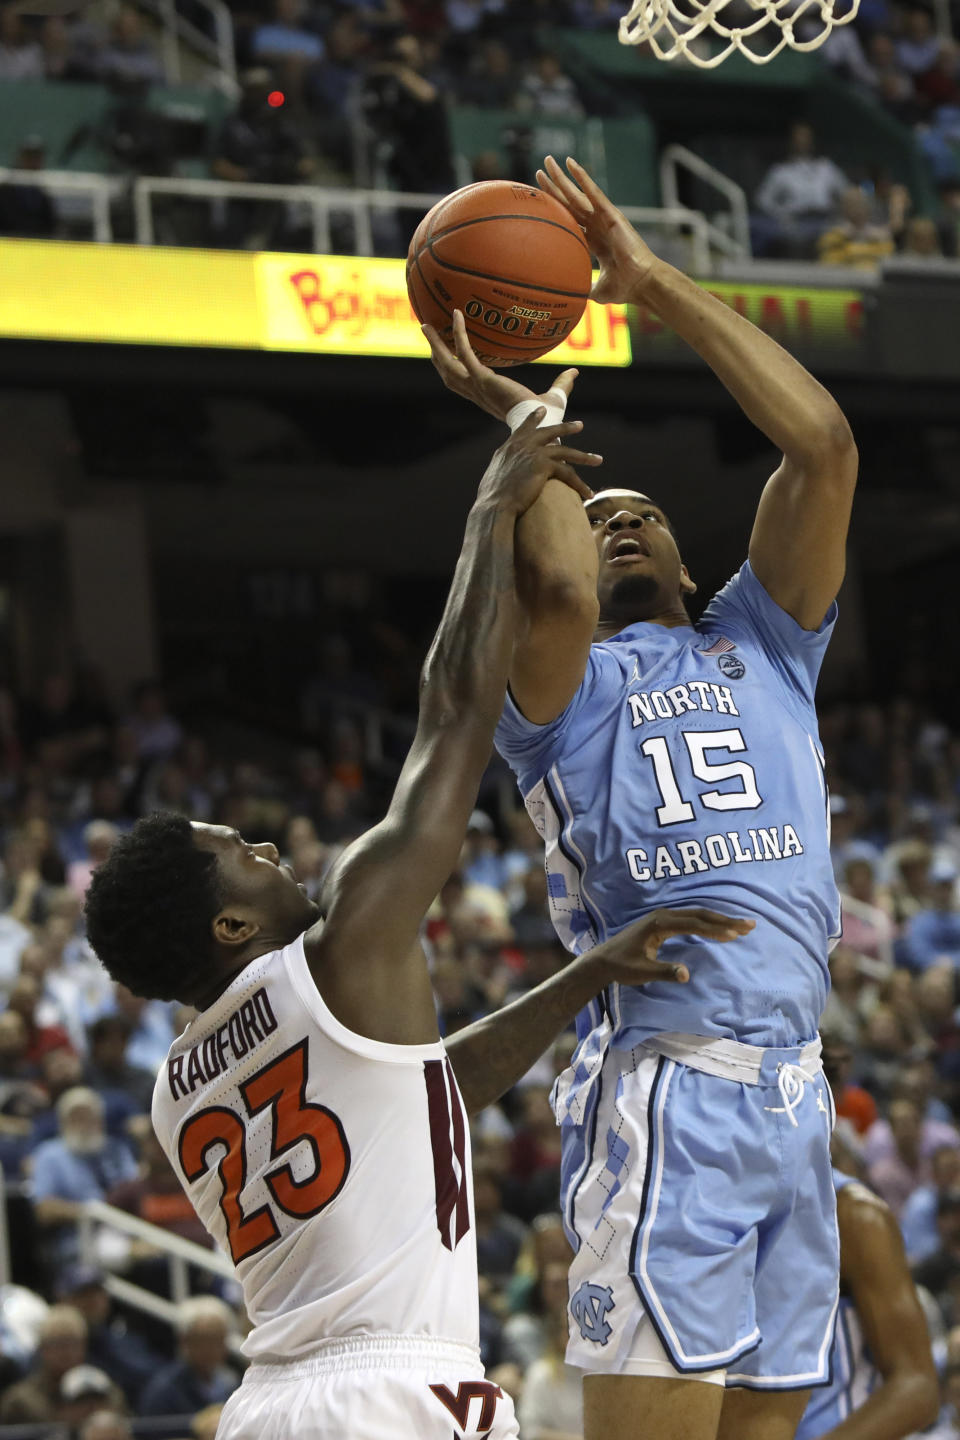 Virginia Tech guard Tyrece Radford (23) defends while North Carolina forward Garrison Brooks (15) shoots during the first half of an NCAA college basketball game at the Atlantic Coast Conference tournament in Greensboro, N.C., Tuesday, March 10, 2020. (AP Photo/Ben McKeown)